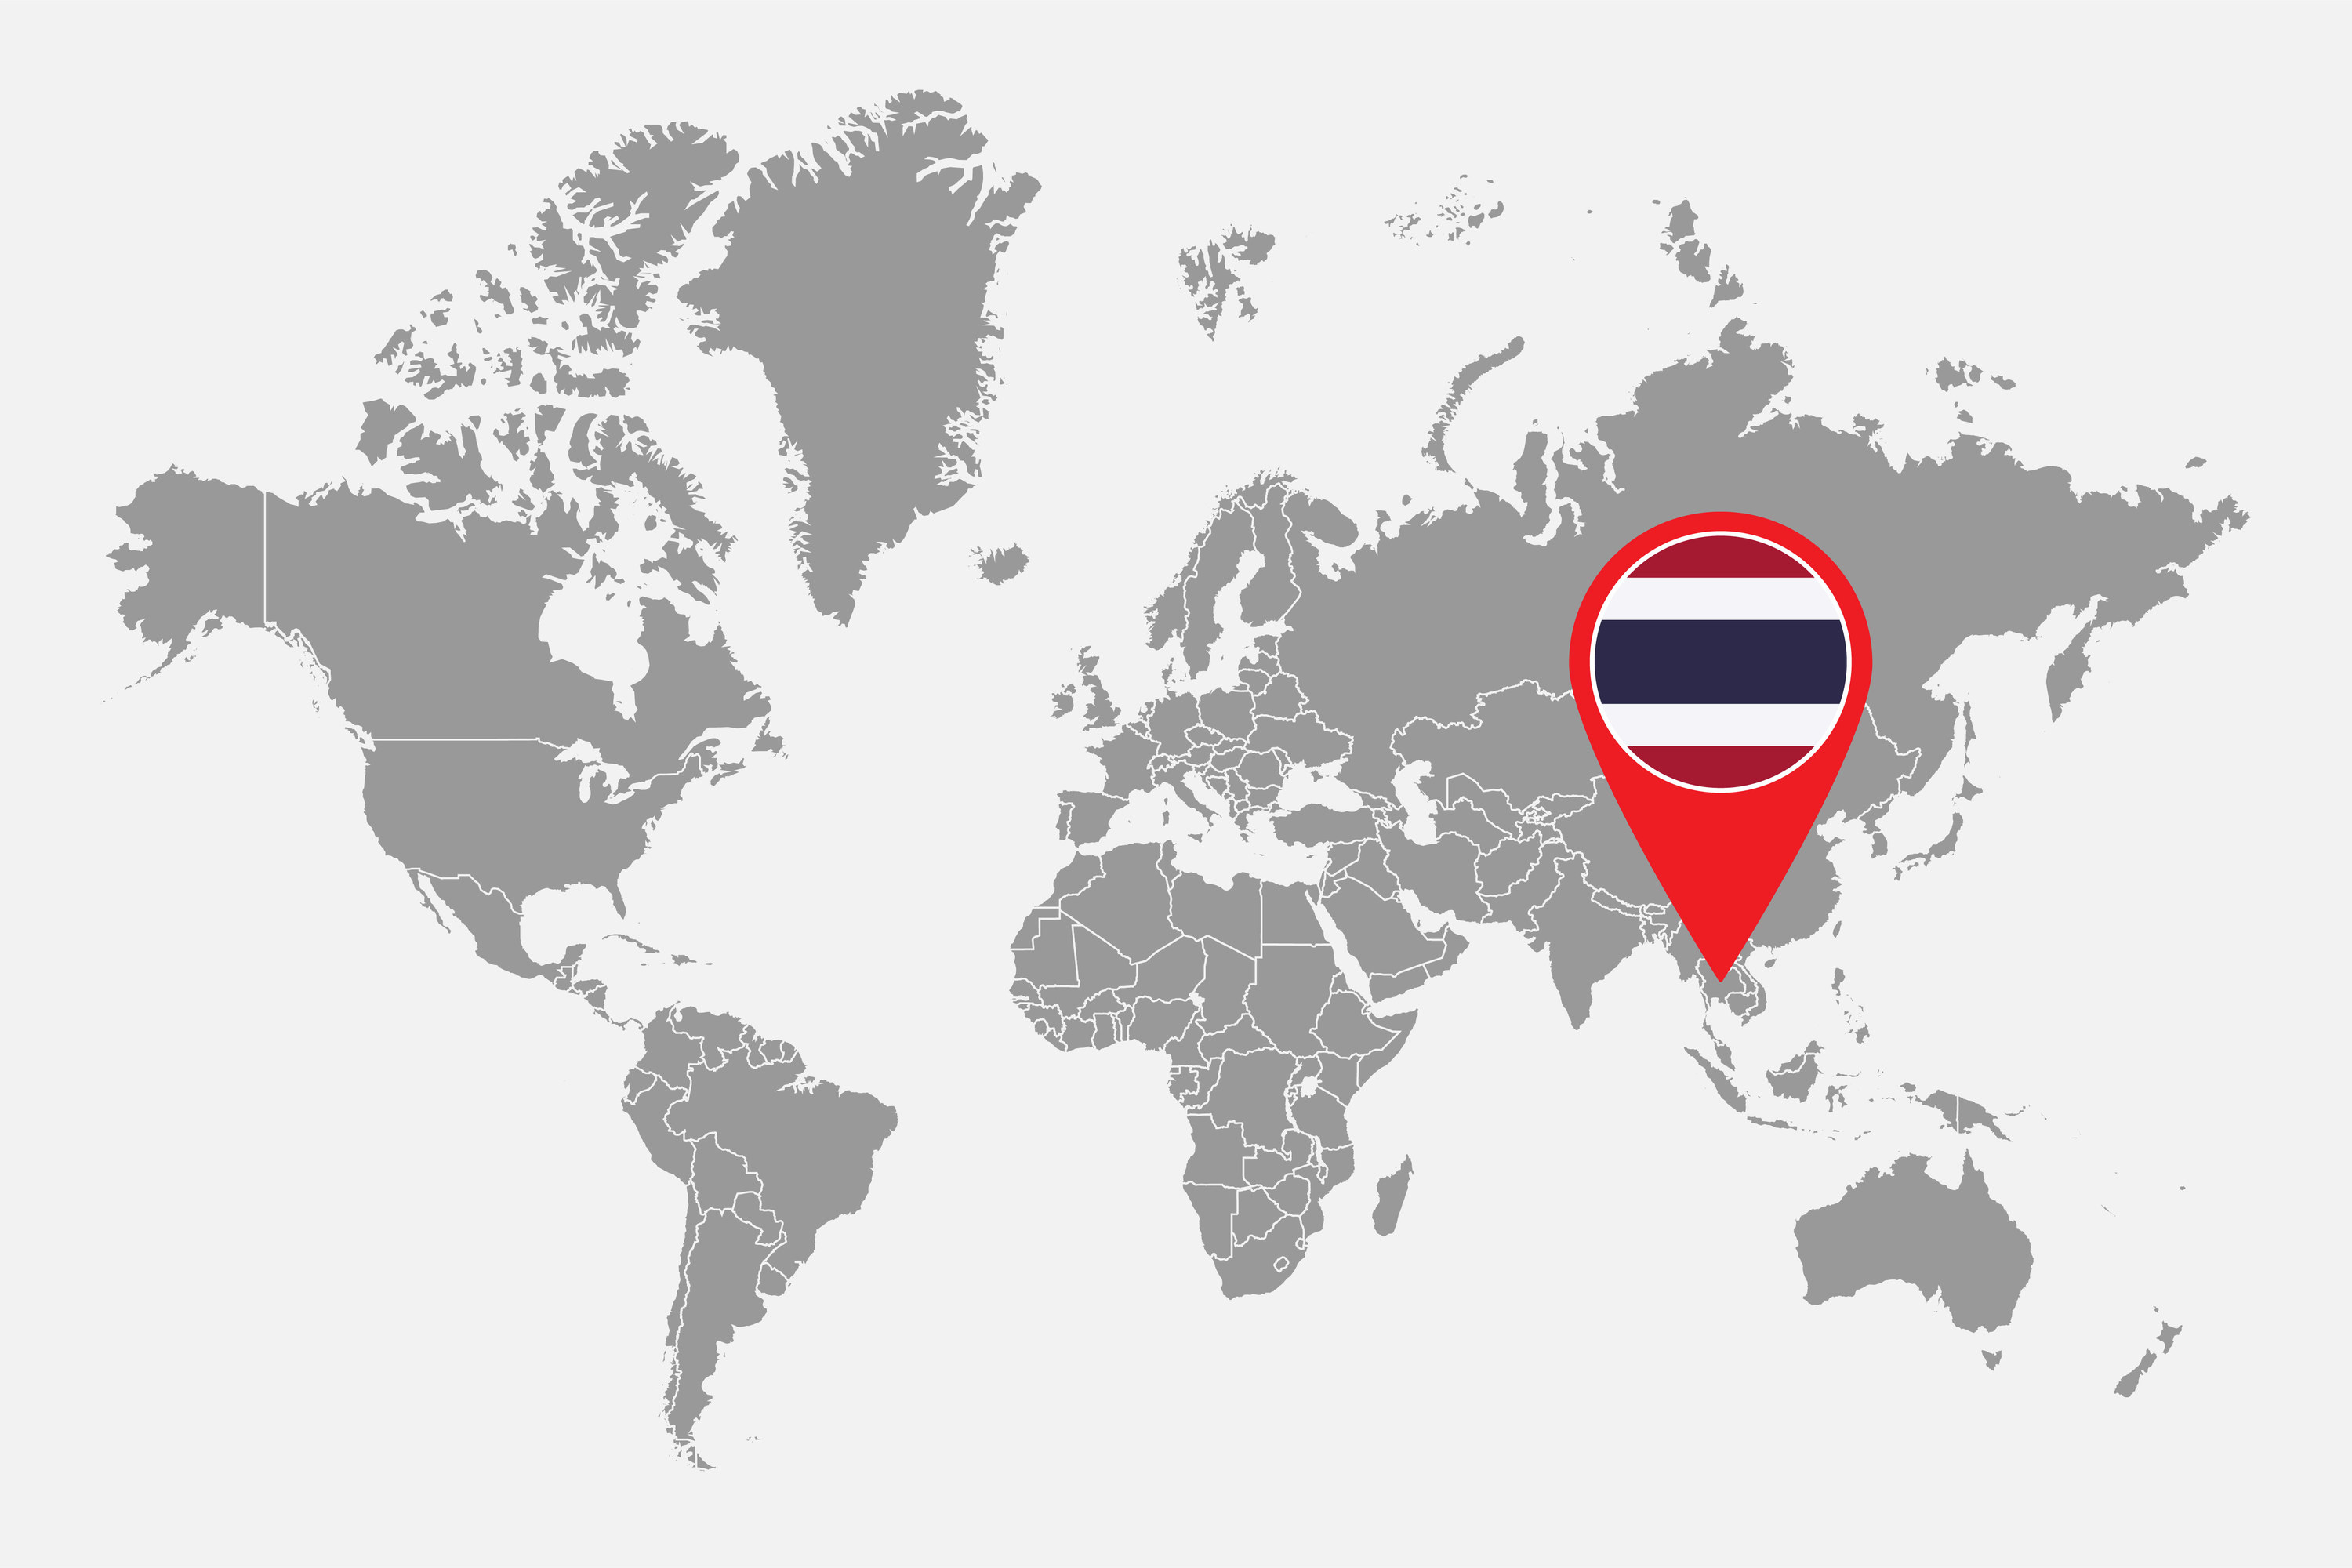 A world map with Thailand indicated